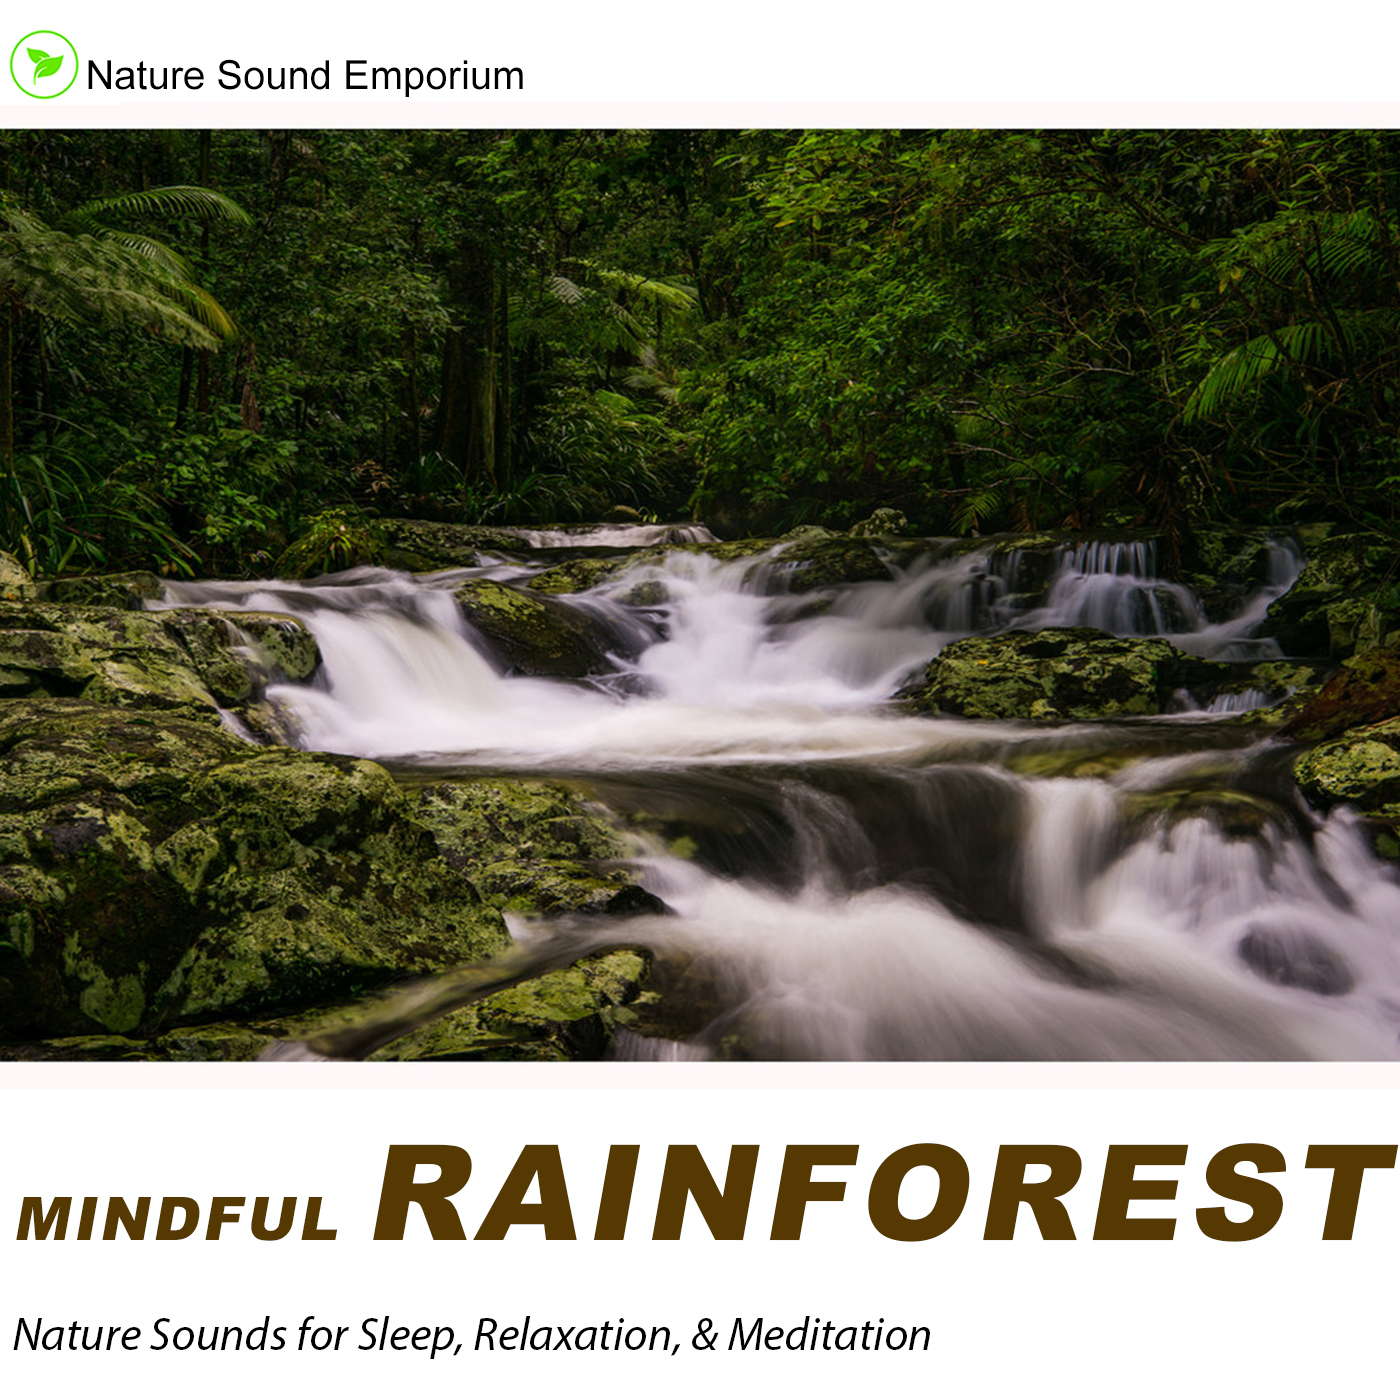 Mindful Rainforest - Nature Sounds for Relaxation, Meditation, Studying & Deep Sleep